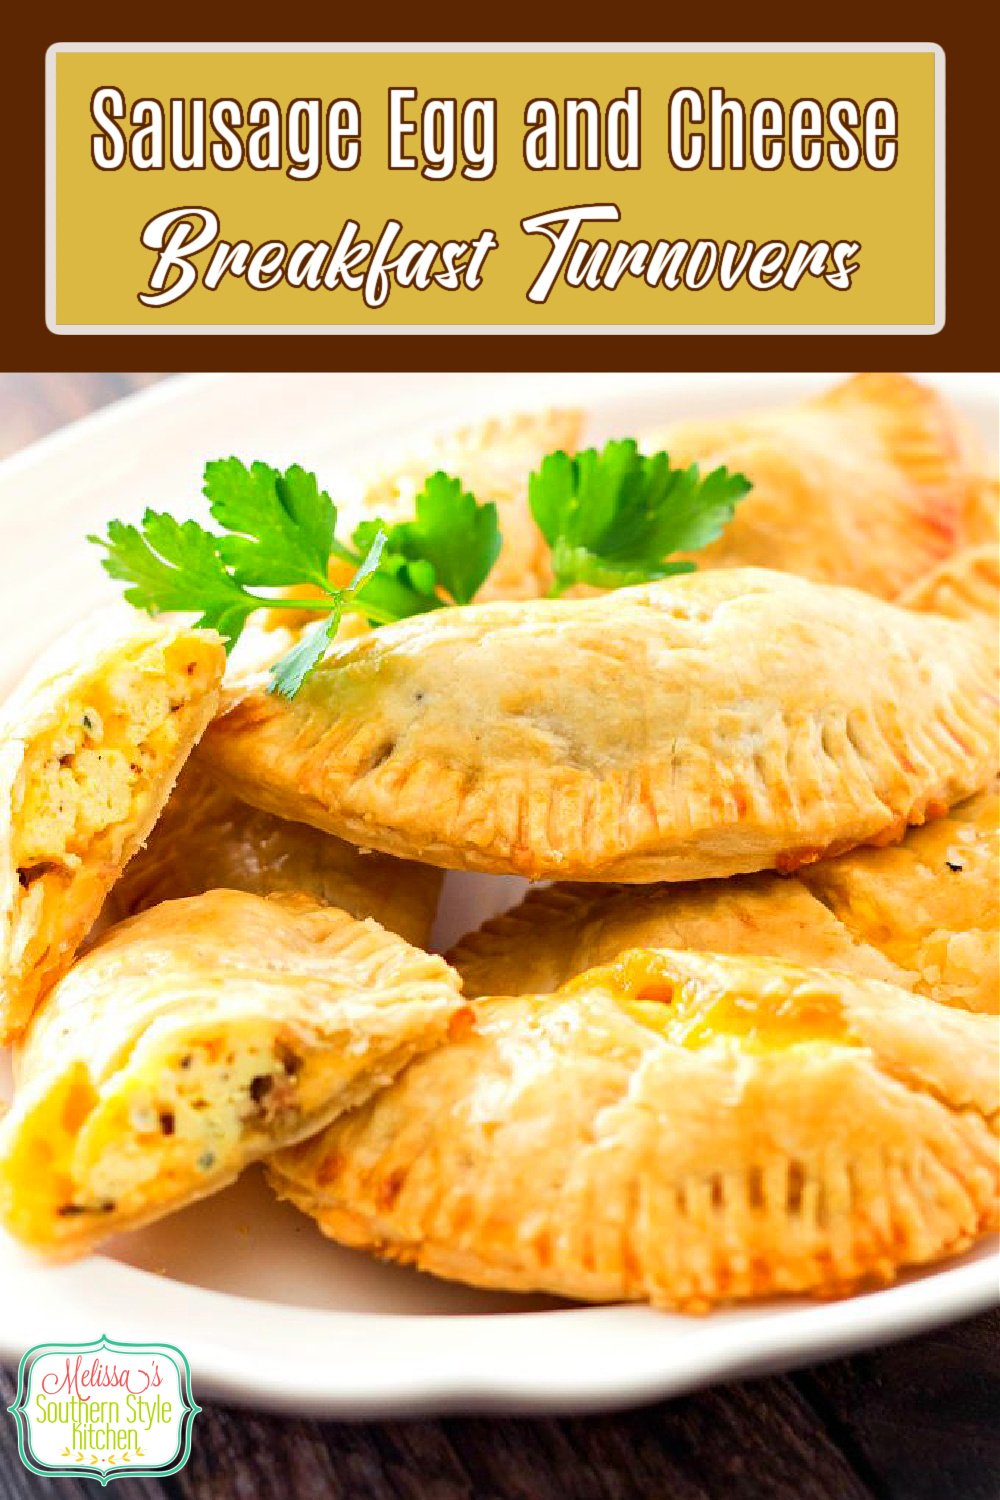 Start your morning with these easy-to-make Sausage and Egg Breakfast Turnovers #breakfastturnovers #sausageandeggs #sausageandeggturnovers #brunch #eggs #sausage #holidaybrunch #eggrecipes #handpies #pies #pastries #southernfood #southernrecipes